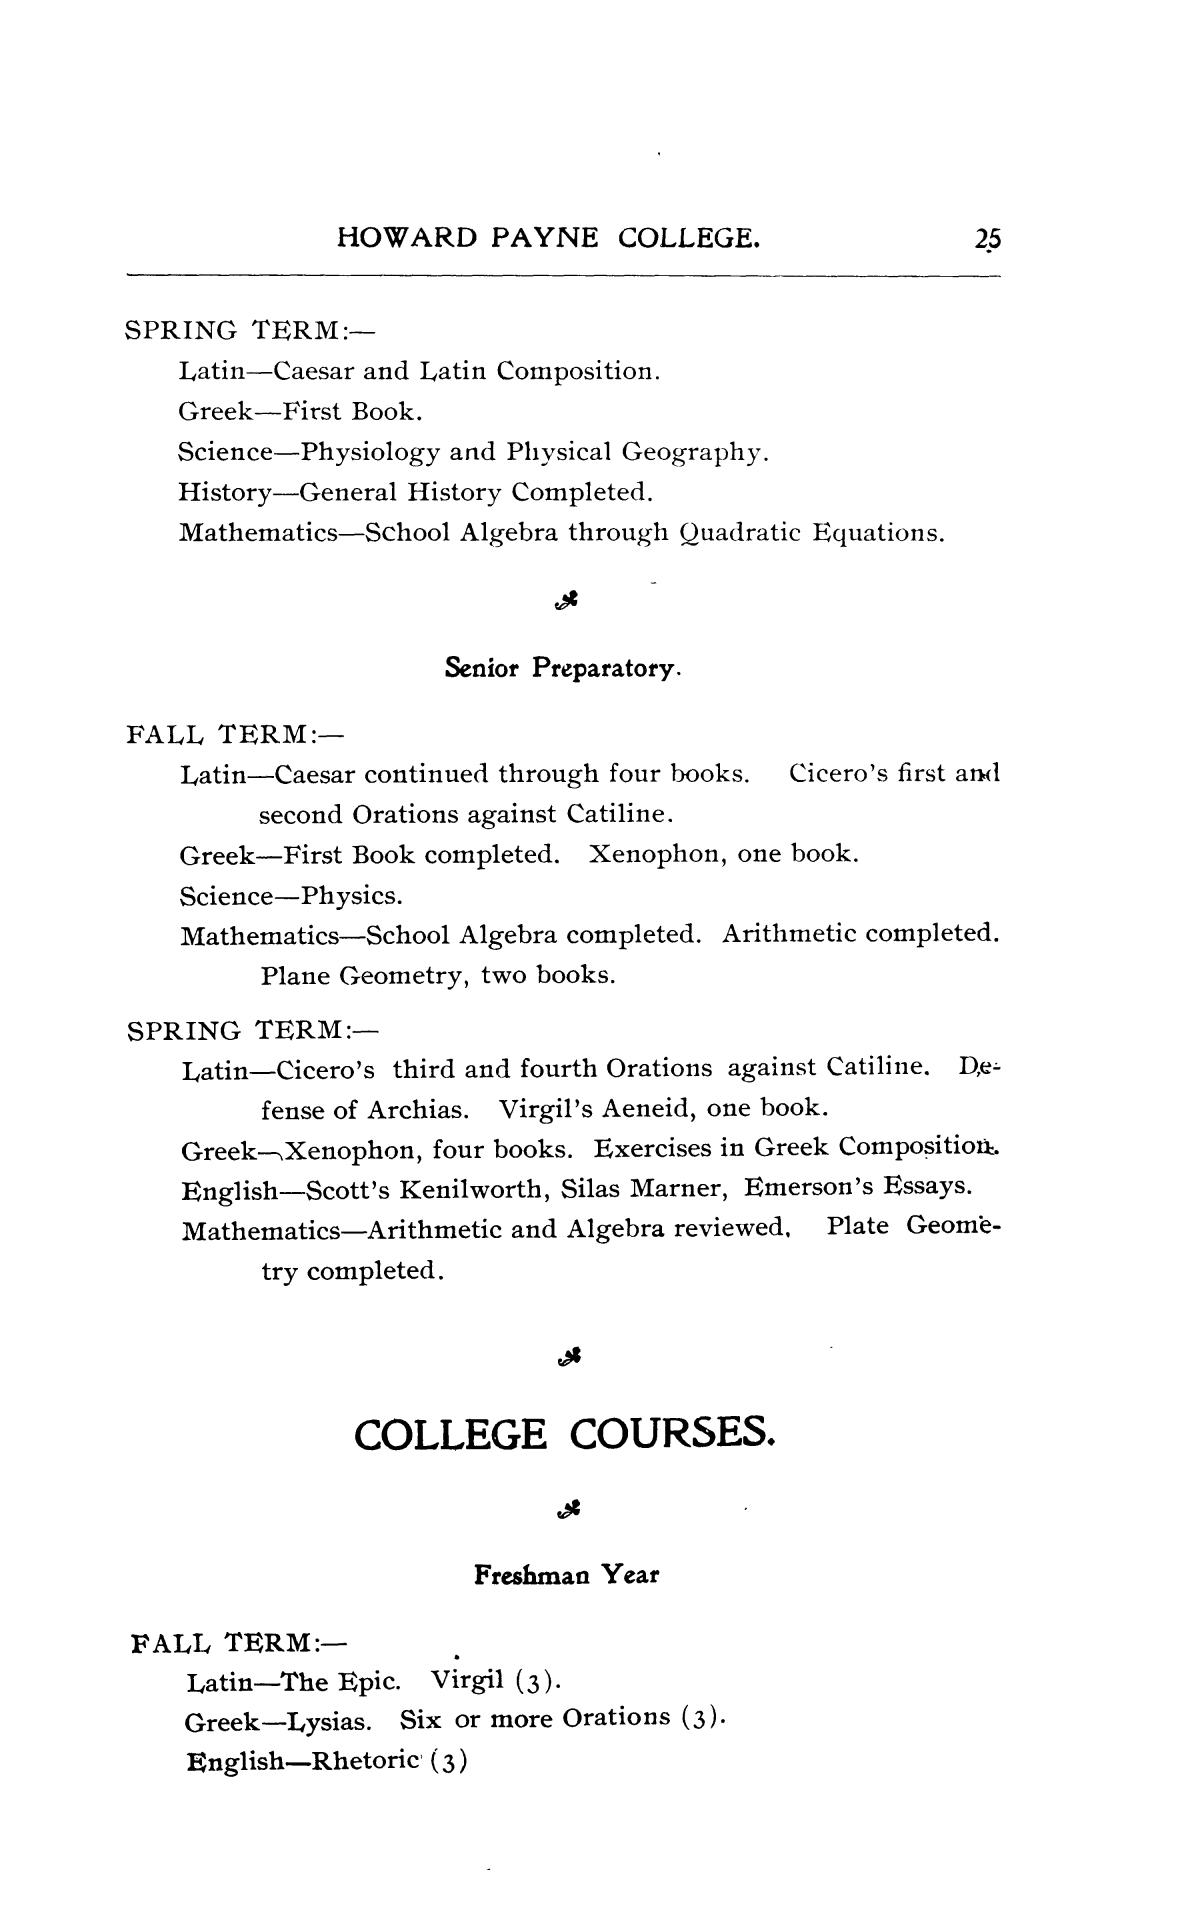 Catalogue of Howard Payne College, 1900-1901
                                                
                                                    25
                                                